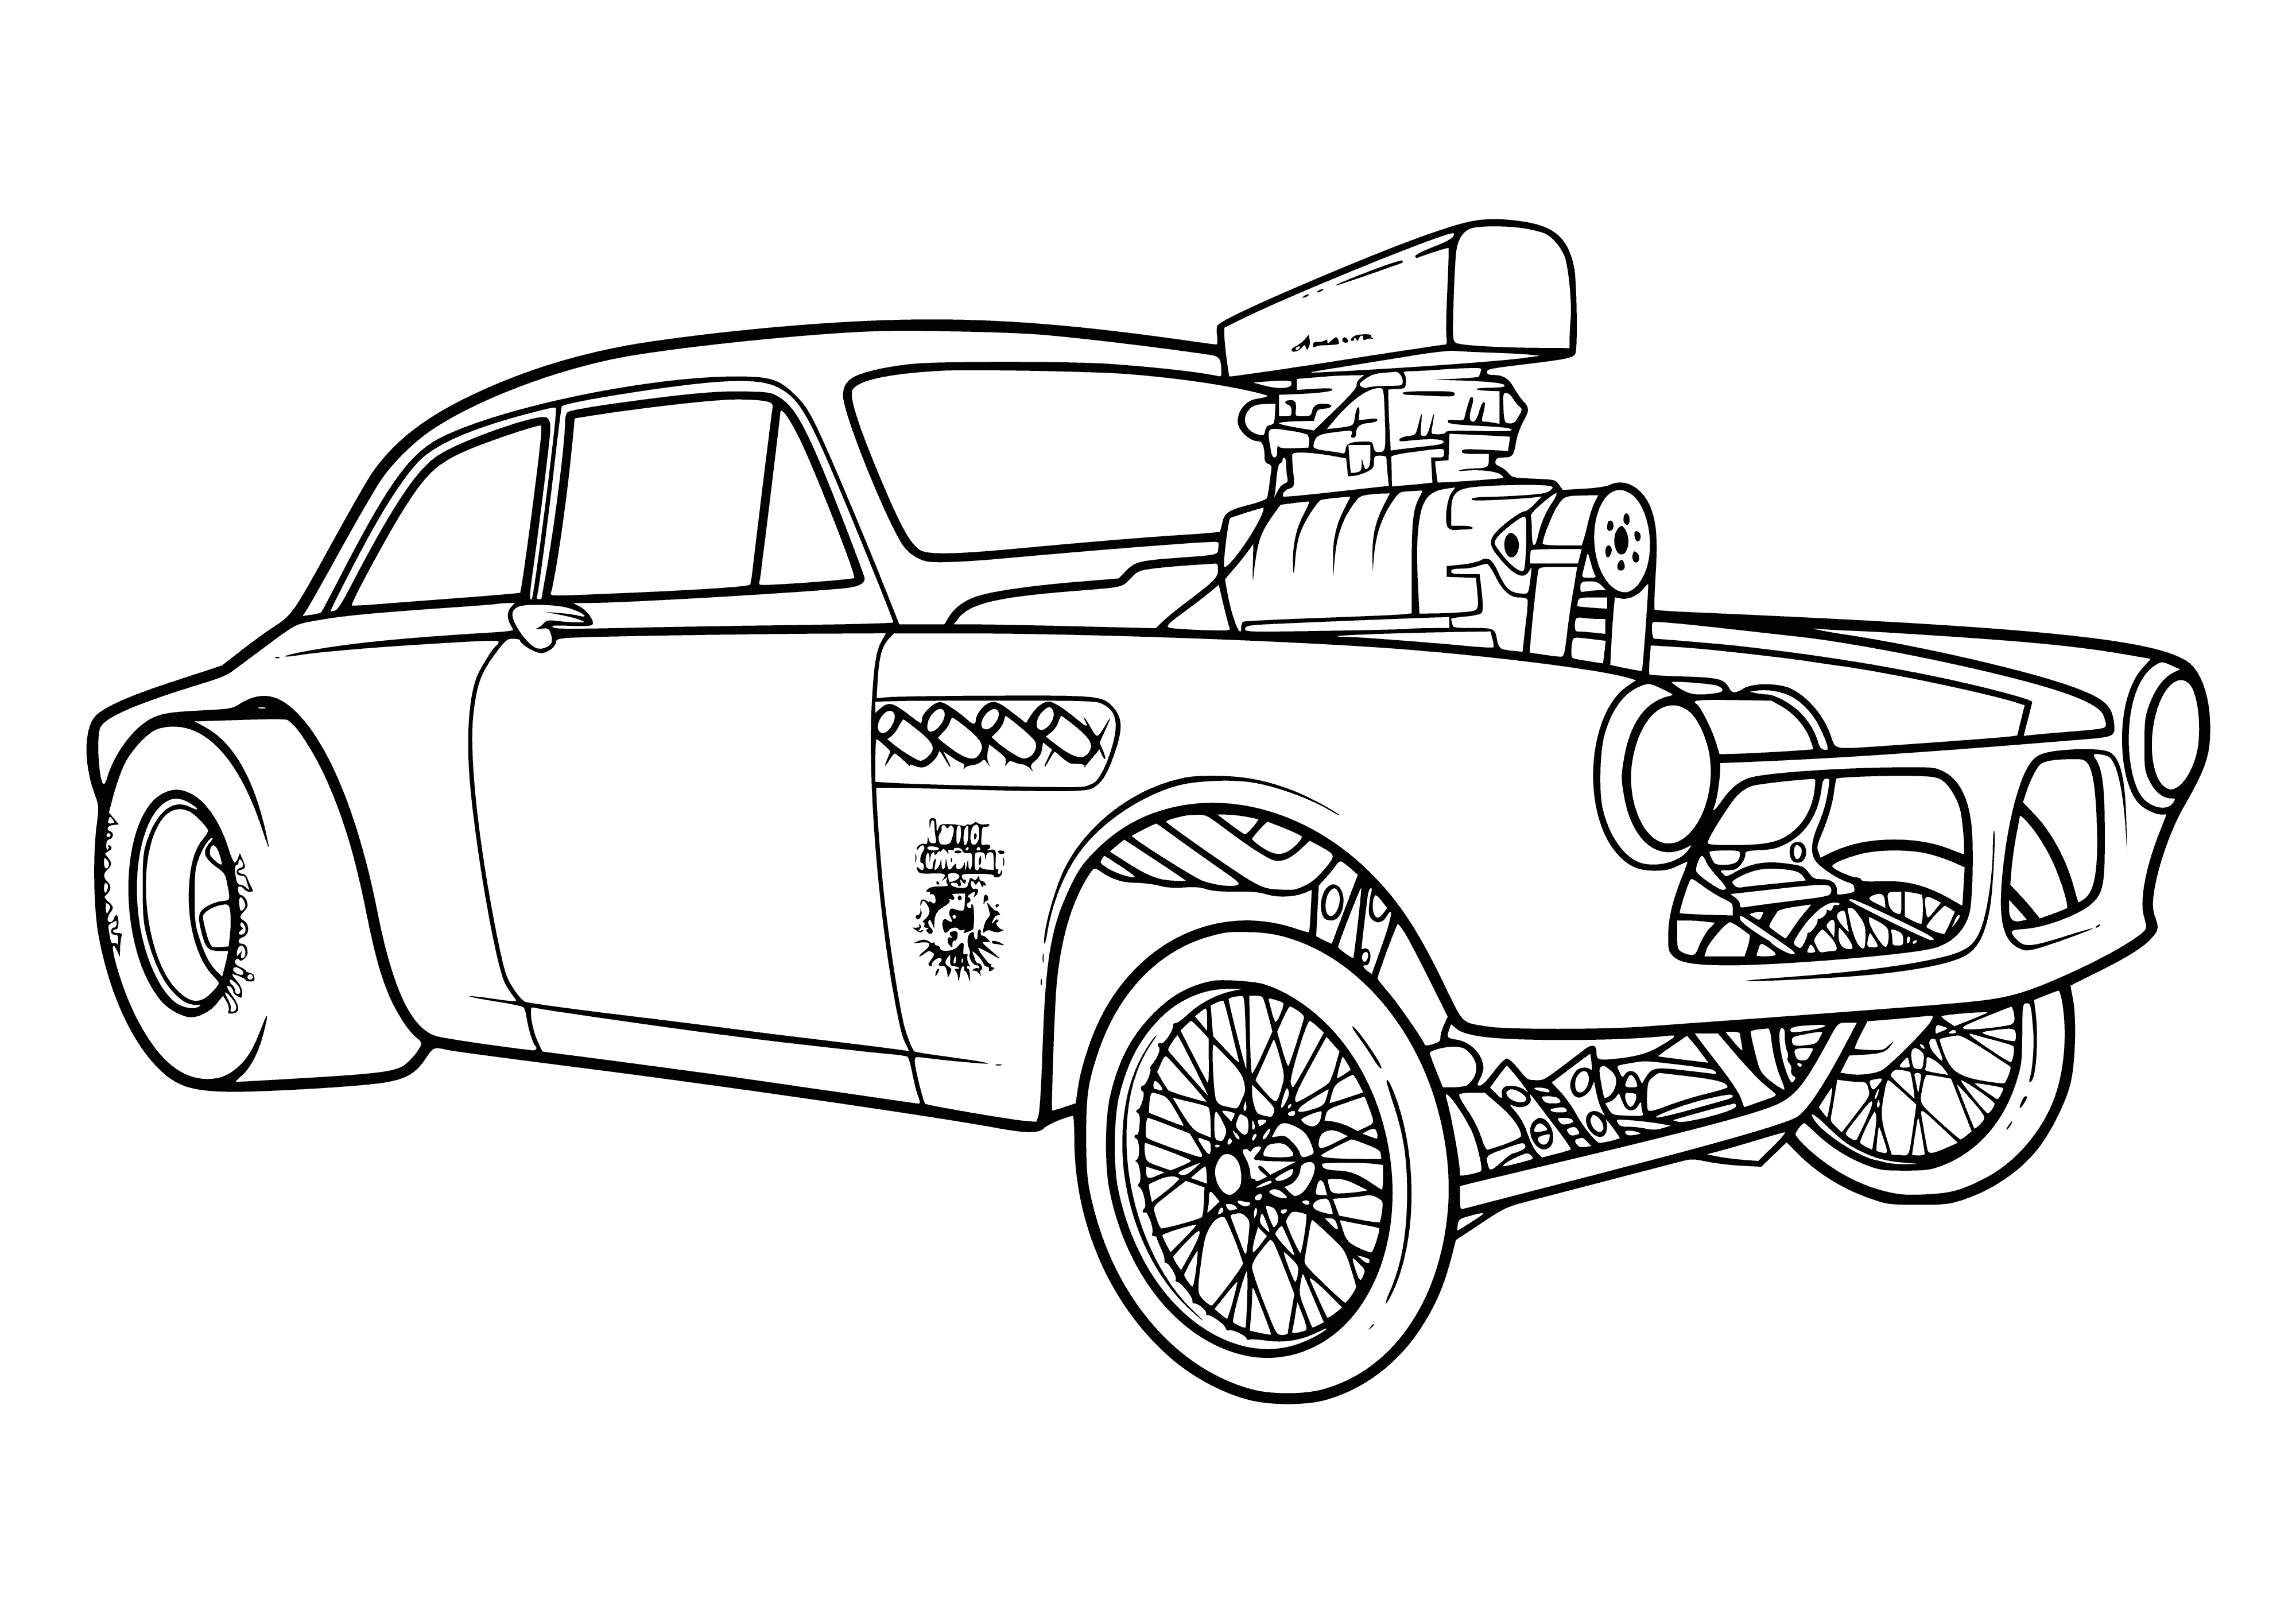 coloring page: Coloring page of small, black car w/ 4 doors & trunk parked on street, building in background.